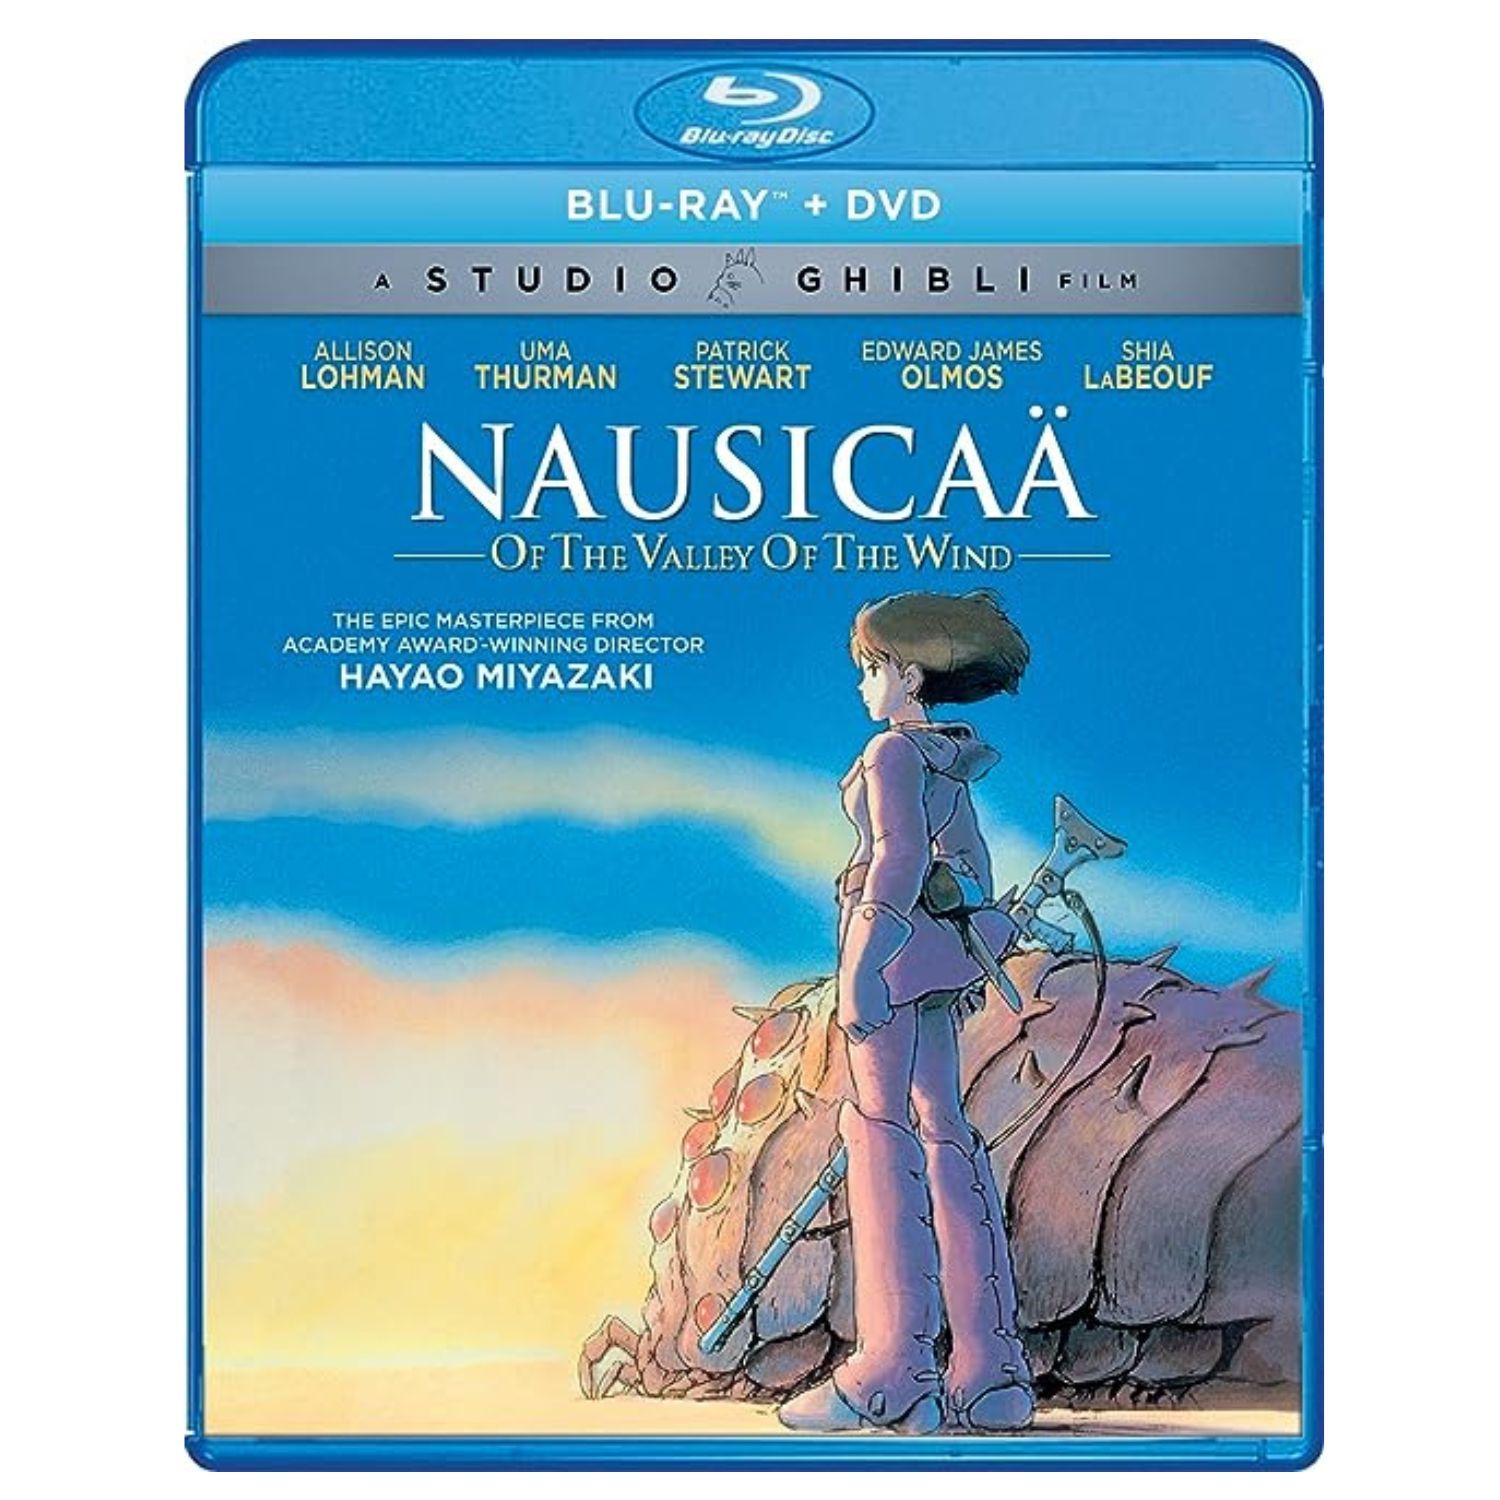 Nausicaa of the Valley of the Wind Blu-ray Cover design